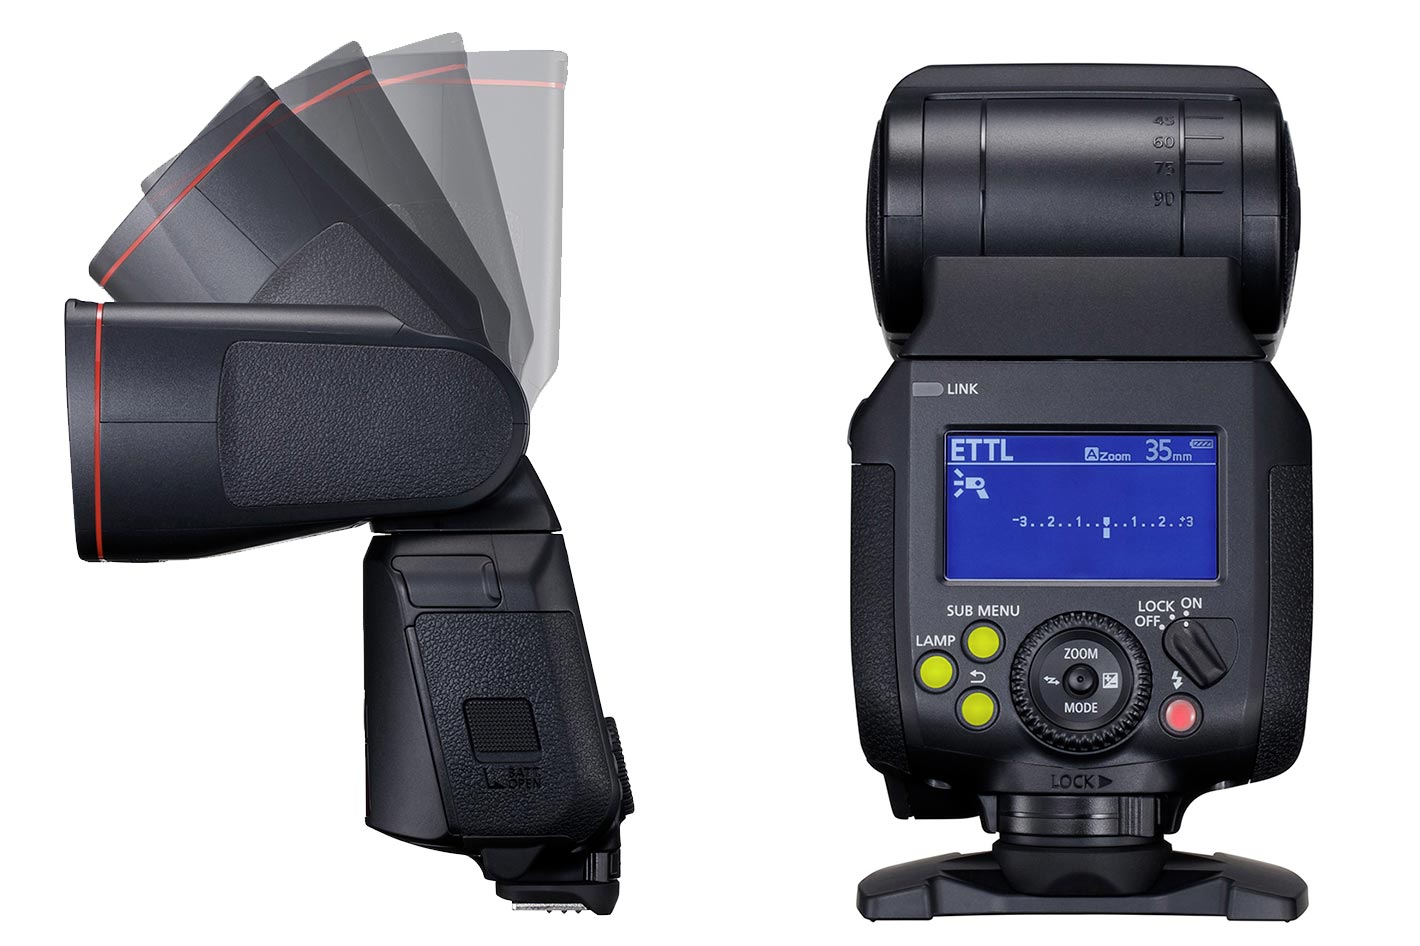 What's going on with Canon Speedlites?